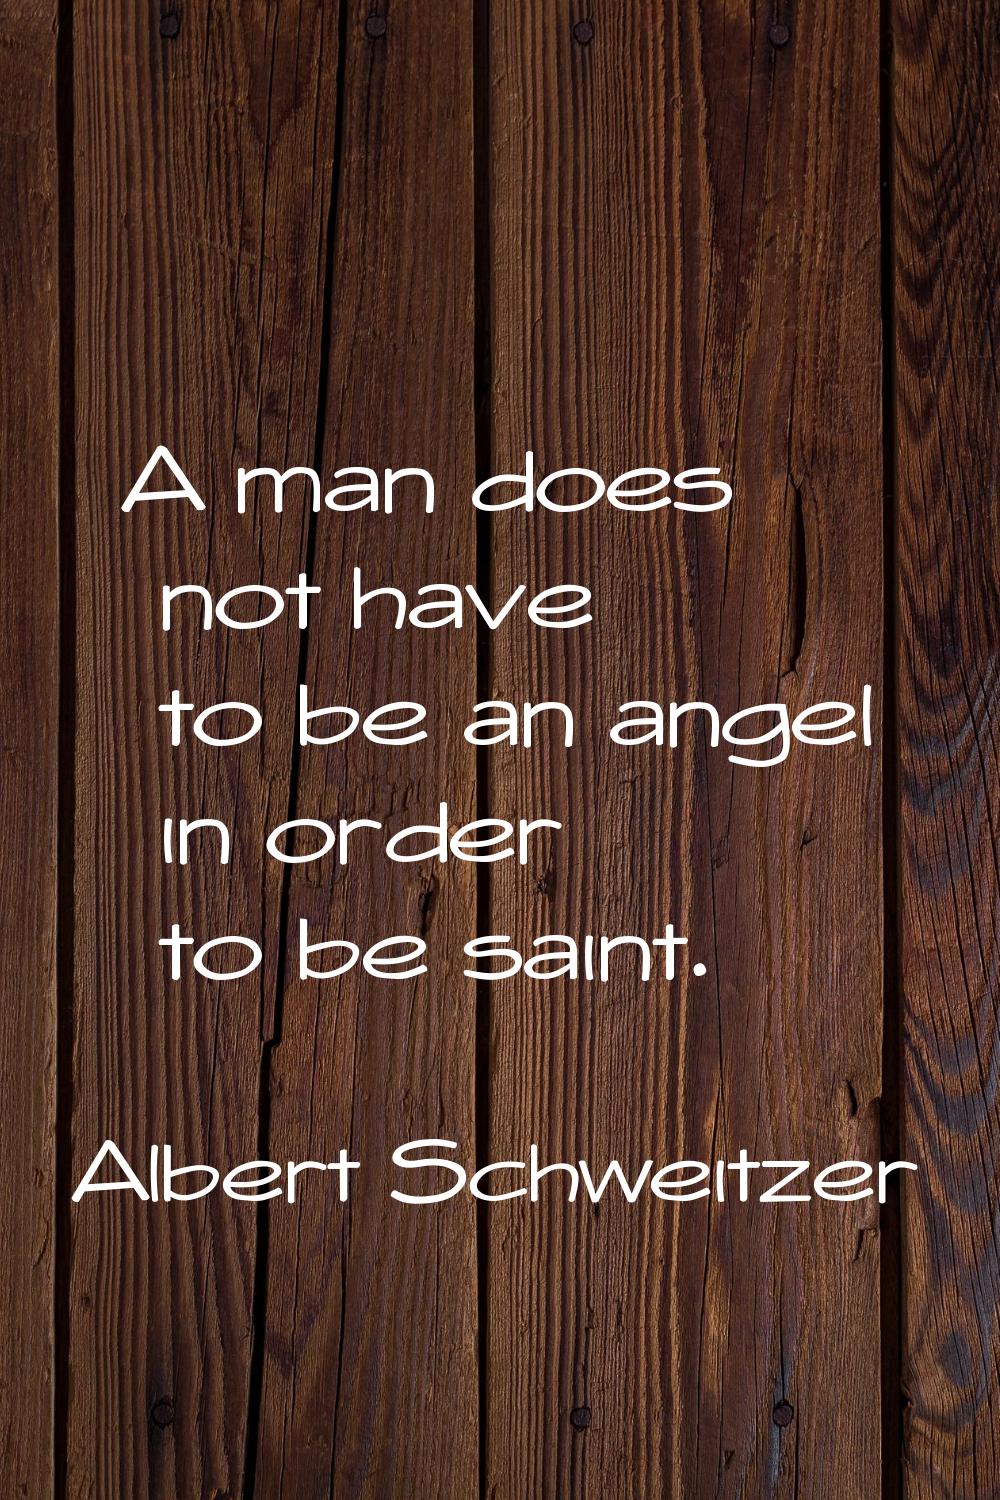 A man does not have to be an angel in order to be saint.